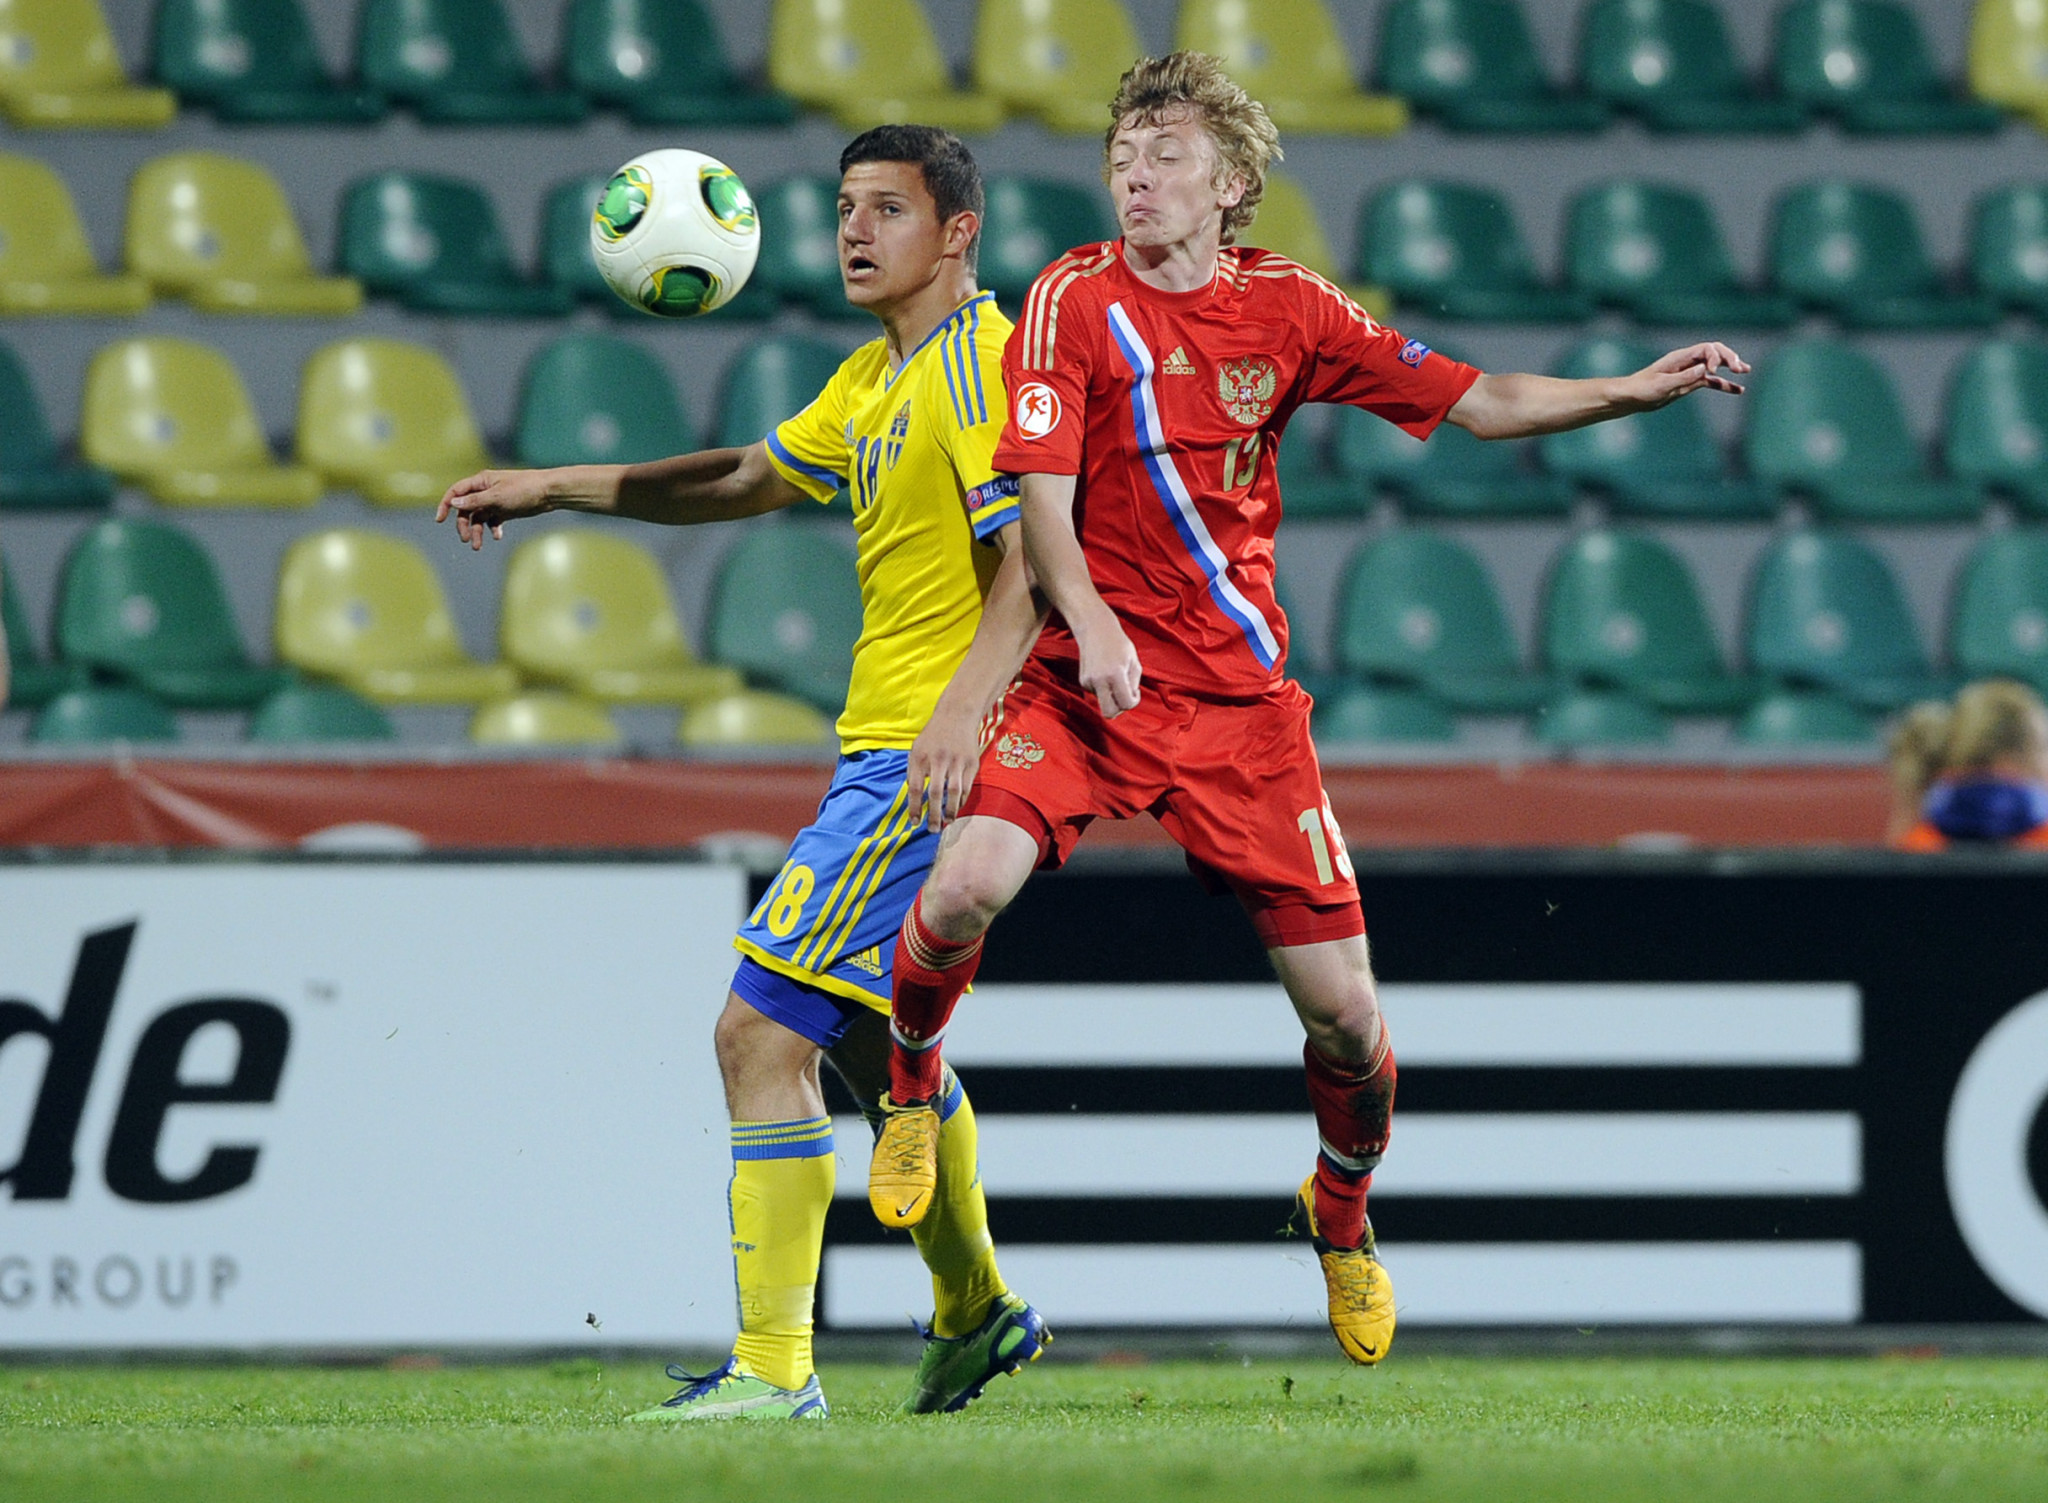 Several European countries refuse to play Russia under-17s after UEFA lifts blanket ban